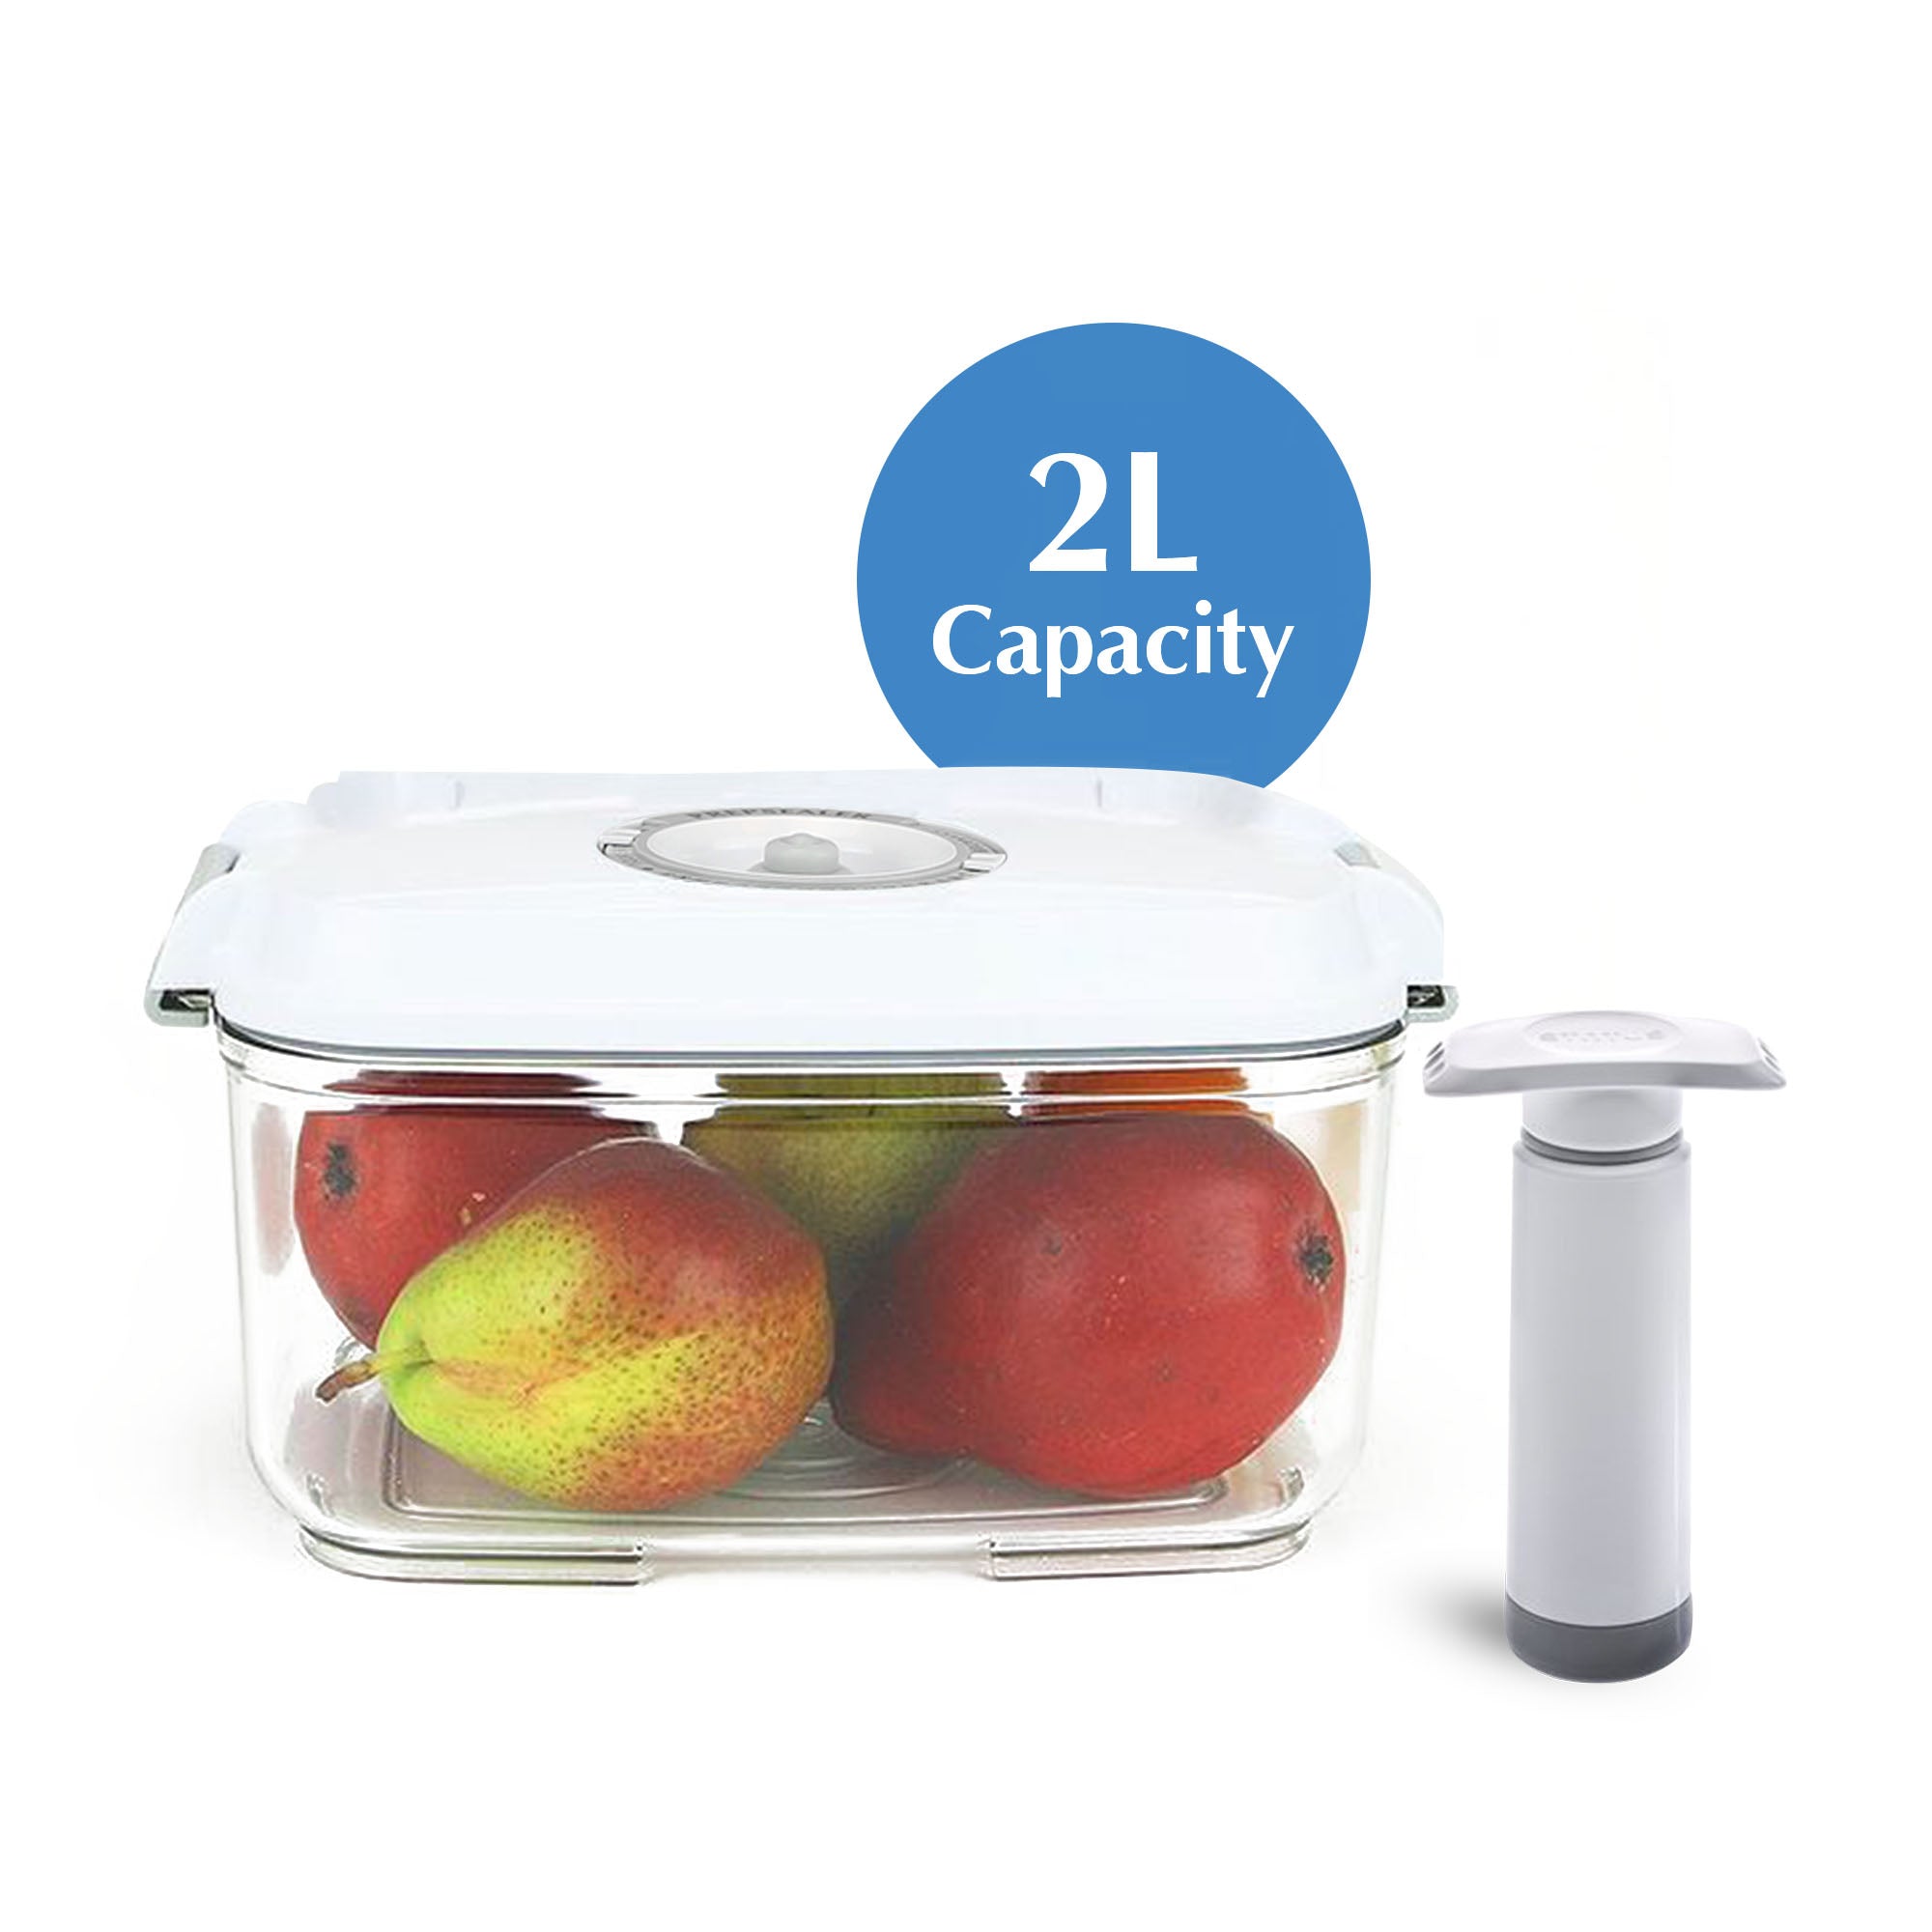 LUVELE GLASS VACUUM FOOD CONTAINER FOUR PIECE SET MEAL PREP CONTAINERS -  Luvele US